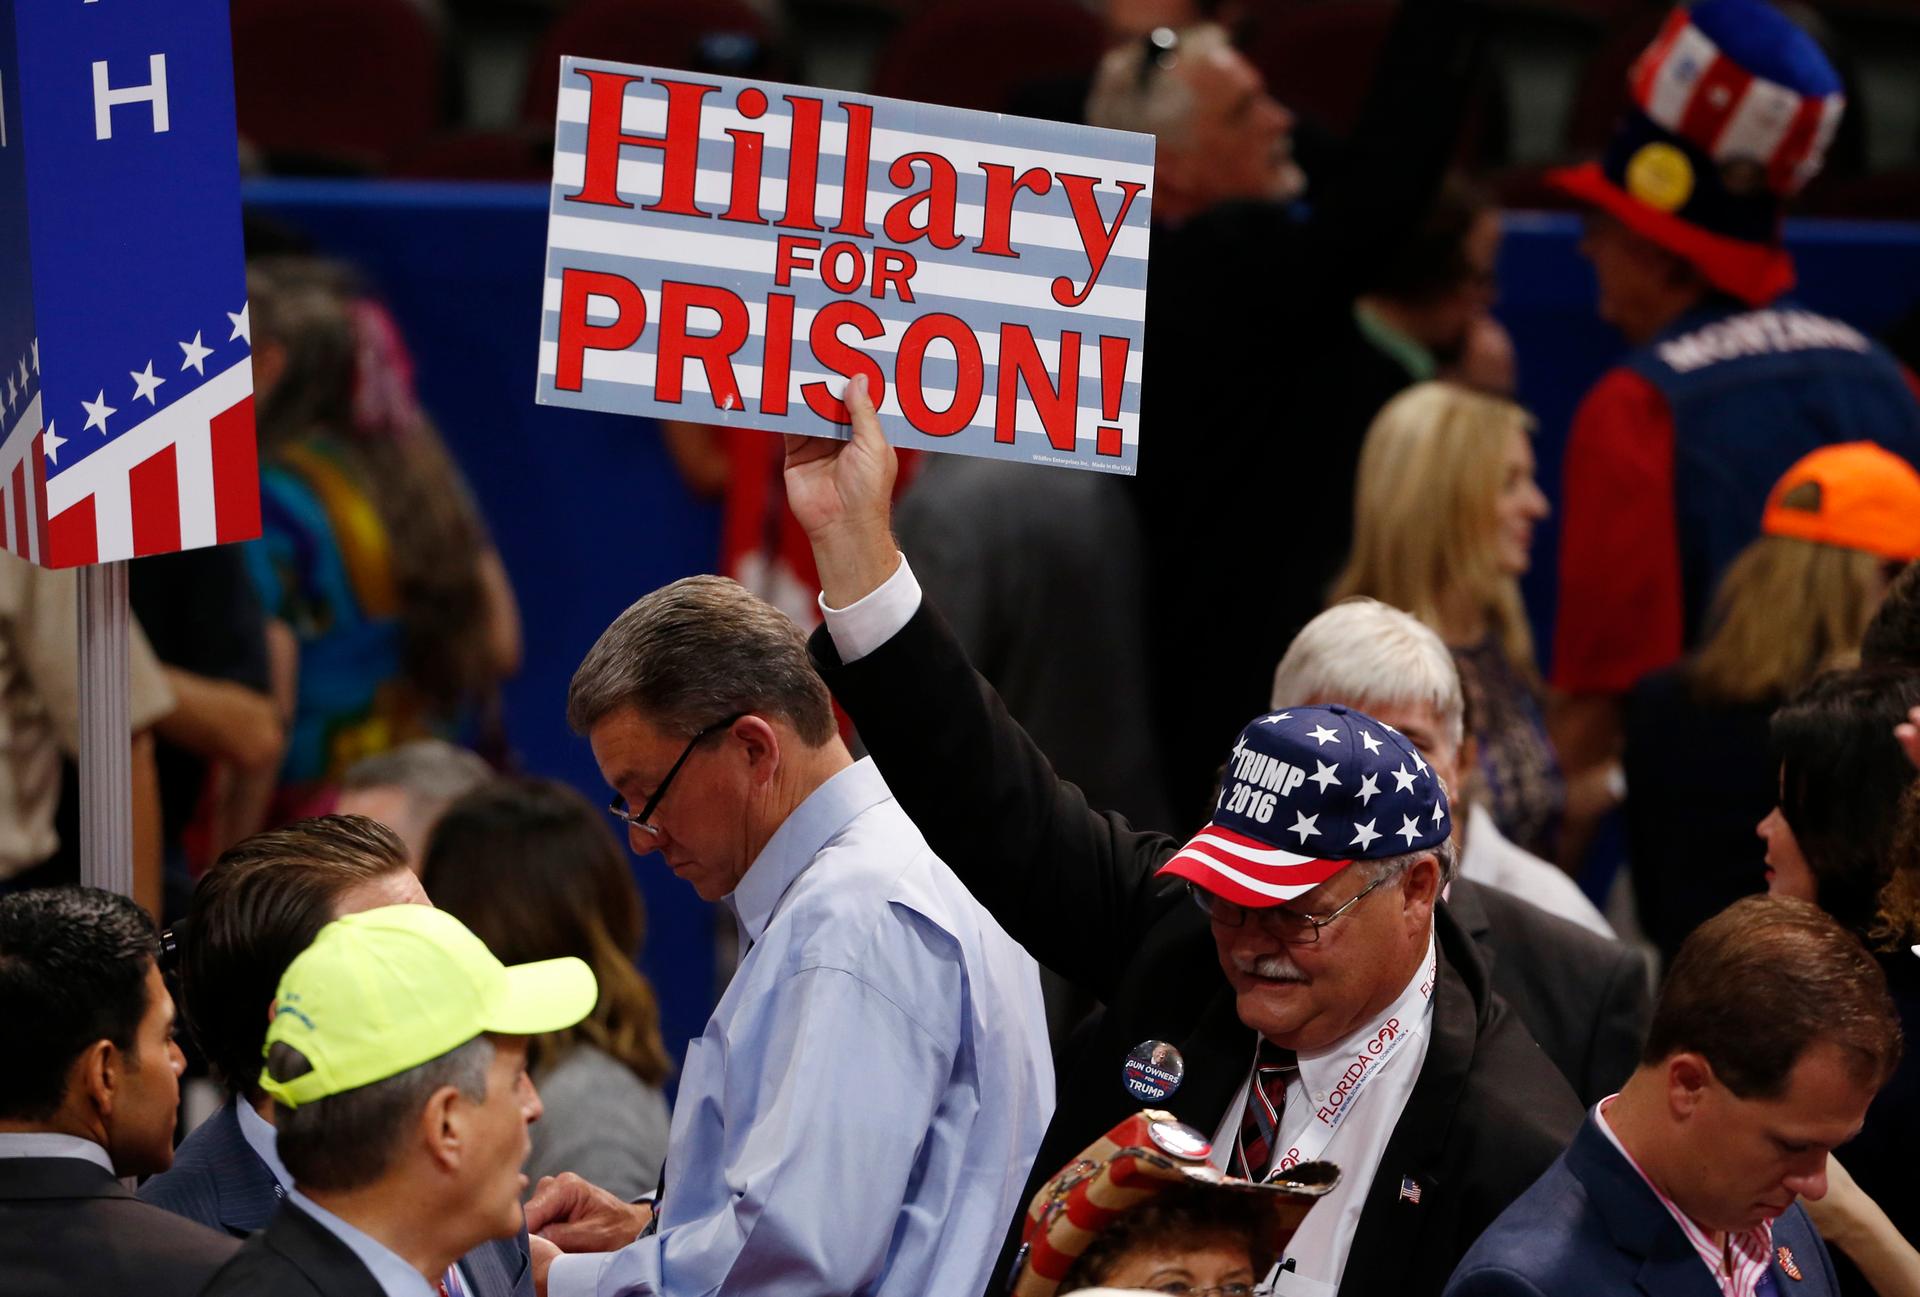 A supporter of Republican U.S. presidential candidate Donald Trump holds up a sign during the first day of the Republican National Convention in Cleveland, Ohio, U.S., July 18, 2016.